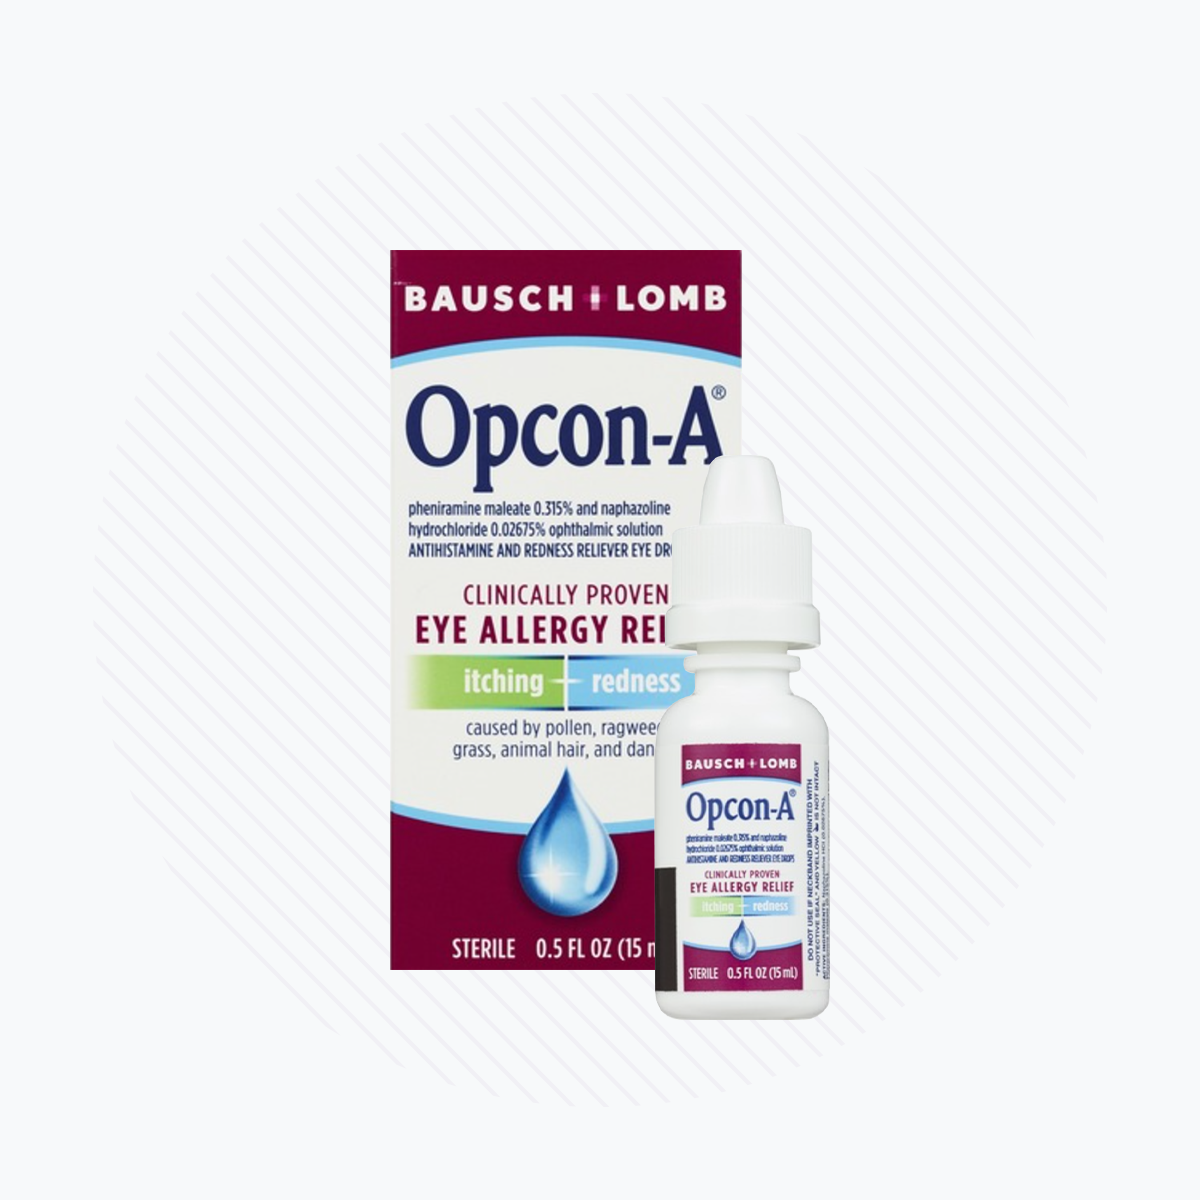 Bausch & Lomb Opcon-A Eye Drops for Allergy Relief 15mL